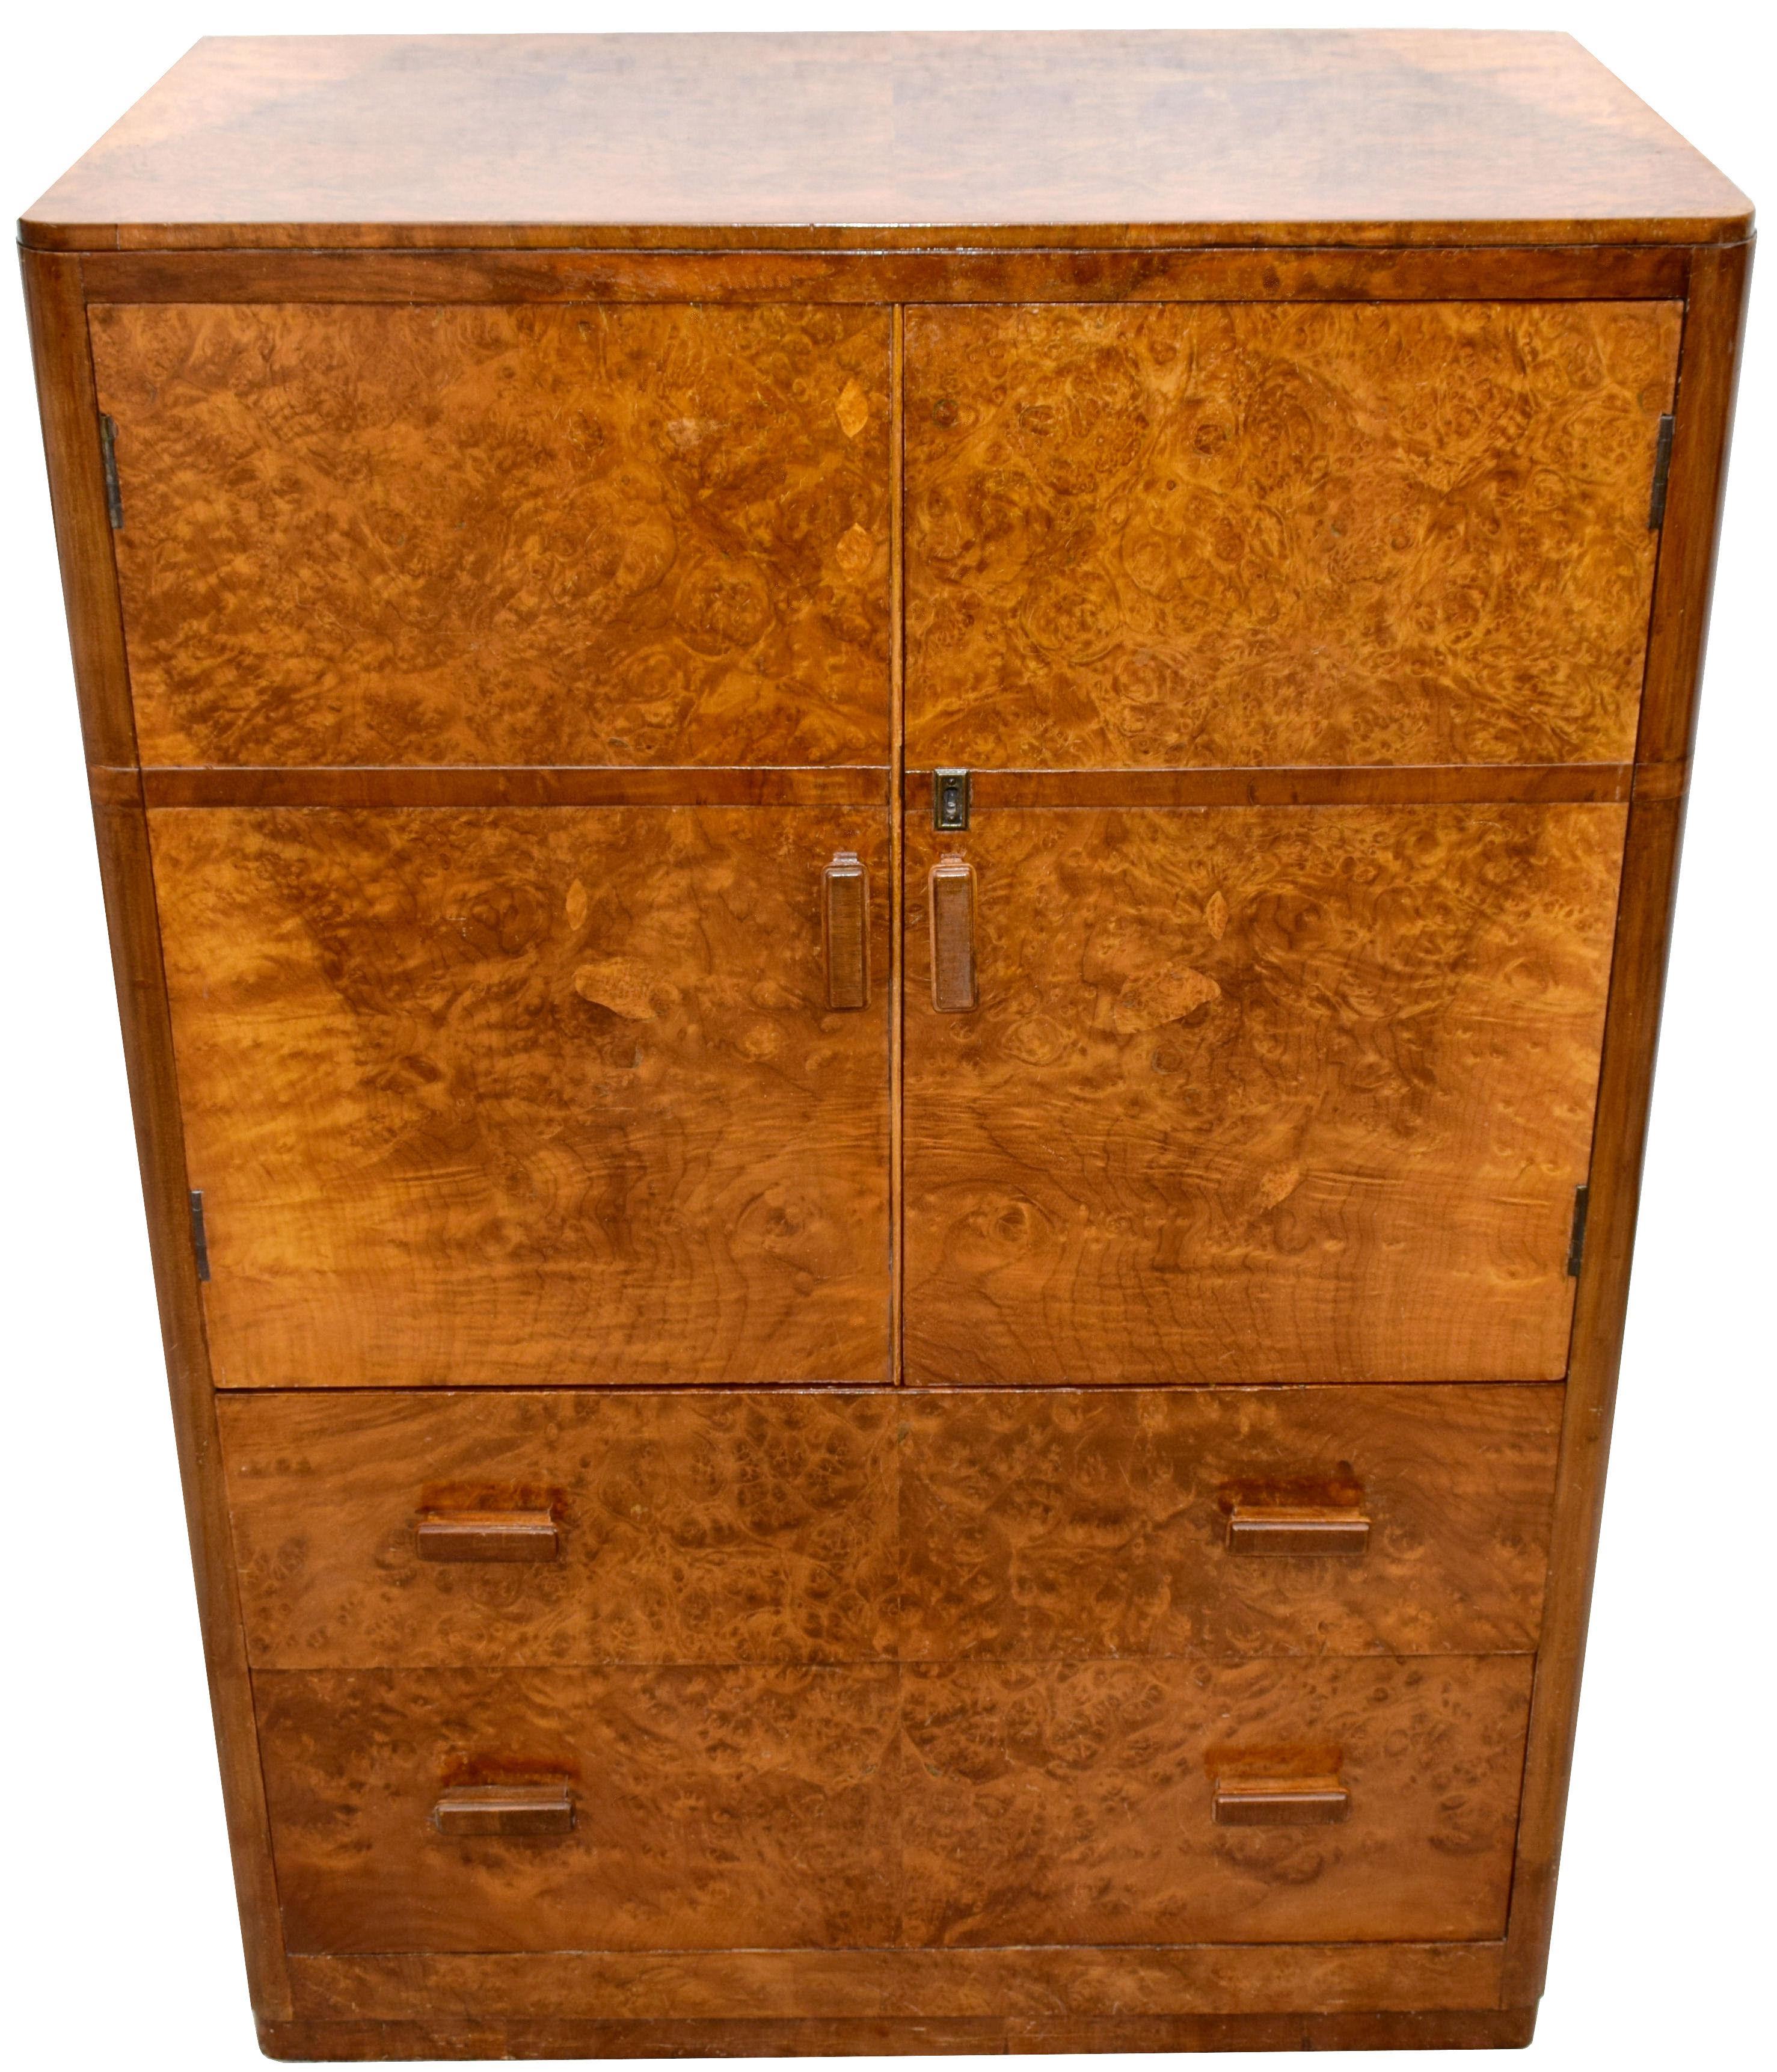 For your consideration is this English Art Deco walnut two-door, two-drawer single-piece tallboy, circa 1930 and in superb original condition. Not only does this tallboy look the part but it's extremely useful too having a very generous interior to